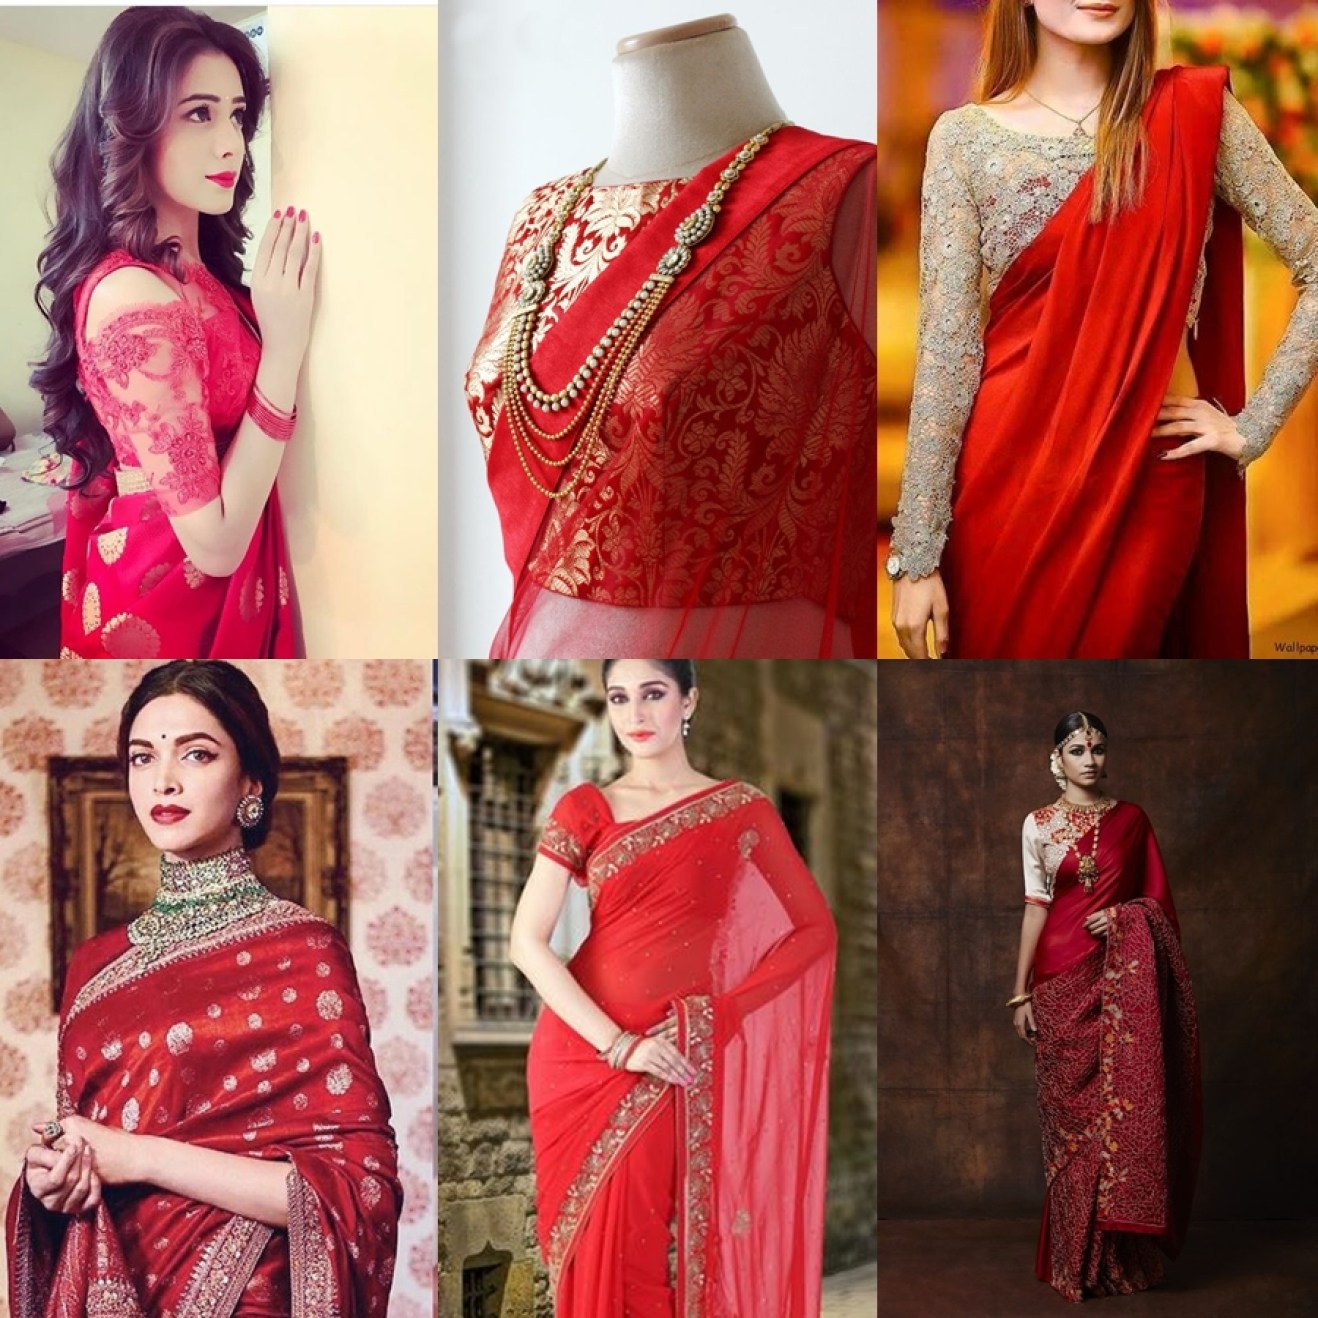 For women, see better saris than this.